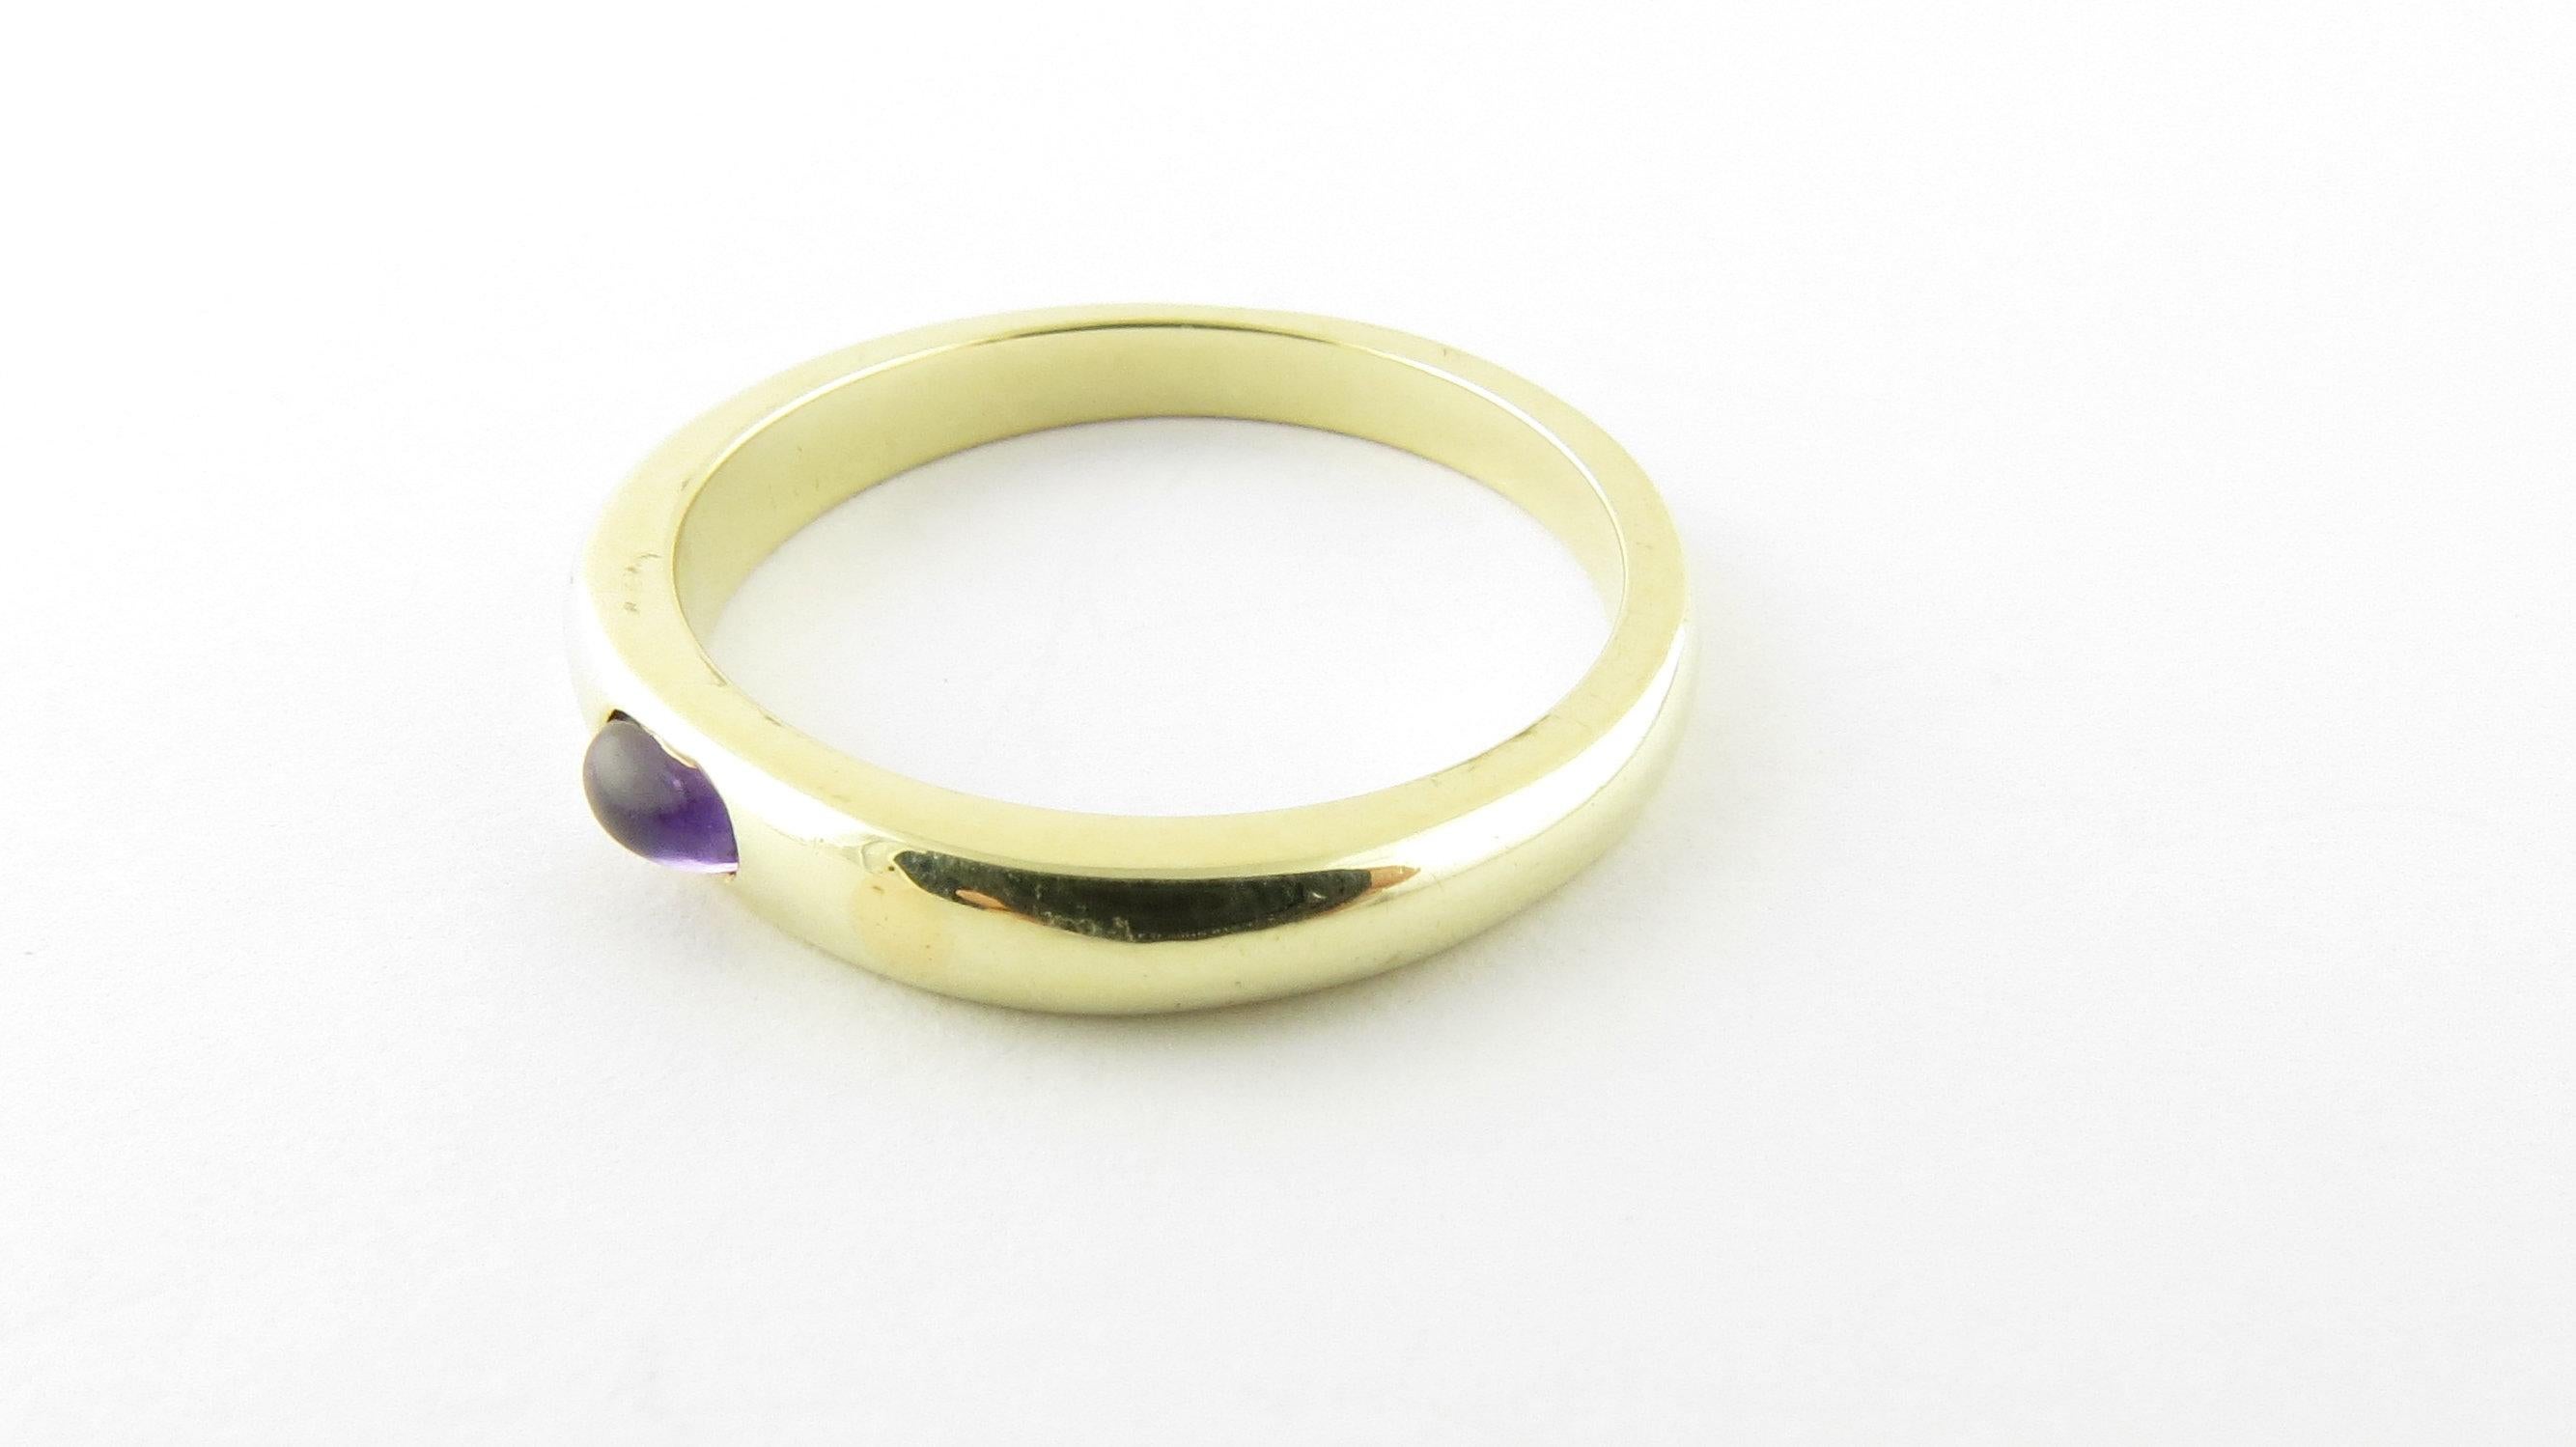 Vintage 14 Karat Yellow Gold Genuine Cabochon Amethyst Stackable Ring Size 9. This lovely ring features one genuine cabochon amethyst (5 mm x 3 mm) set in elegant polished 14K yellow gold. Ring width: 4 mm. Shank: 2 mm.

Available matching stackable